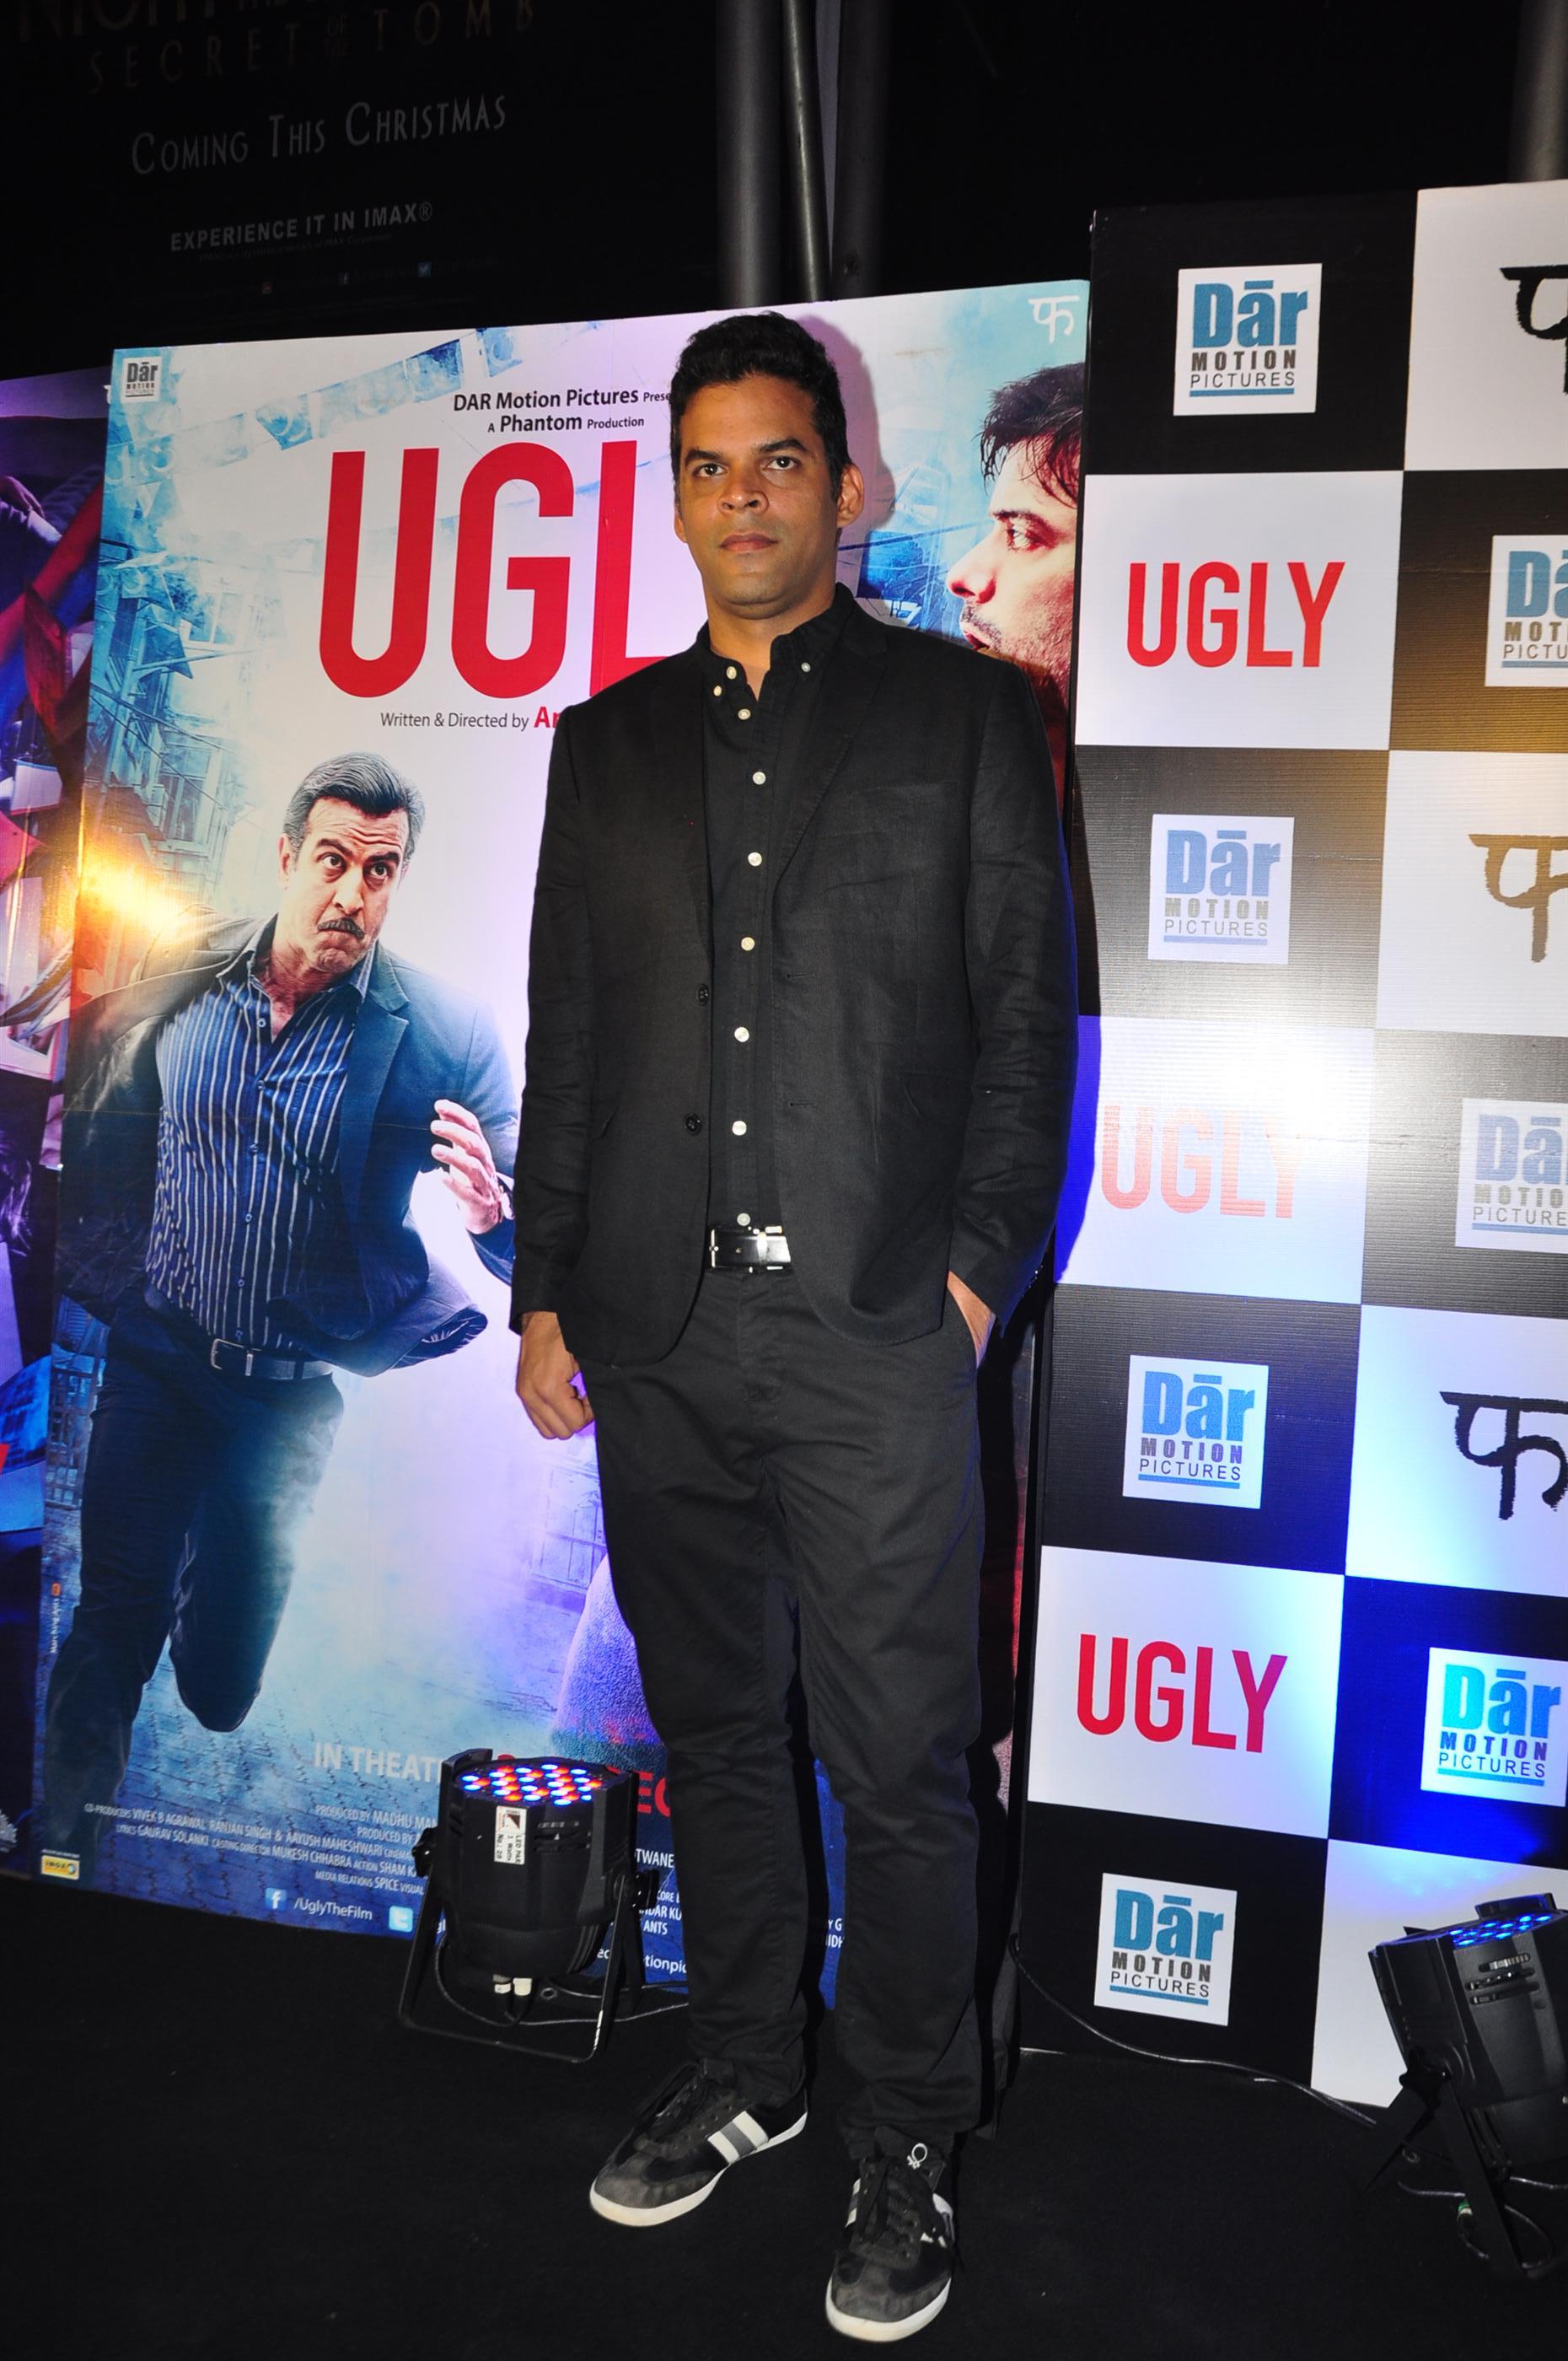 Stars at Ugly Movie Premier Show